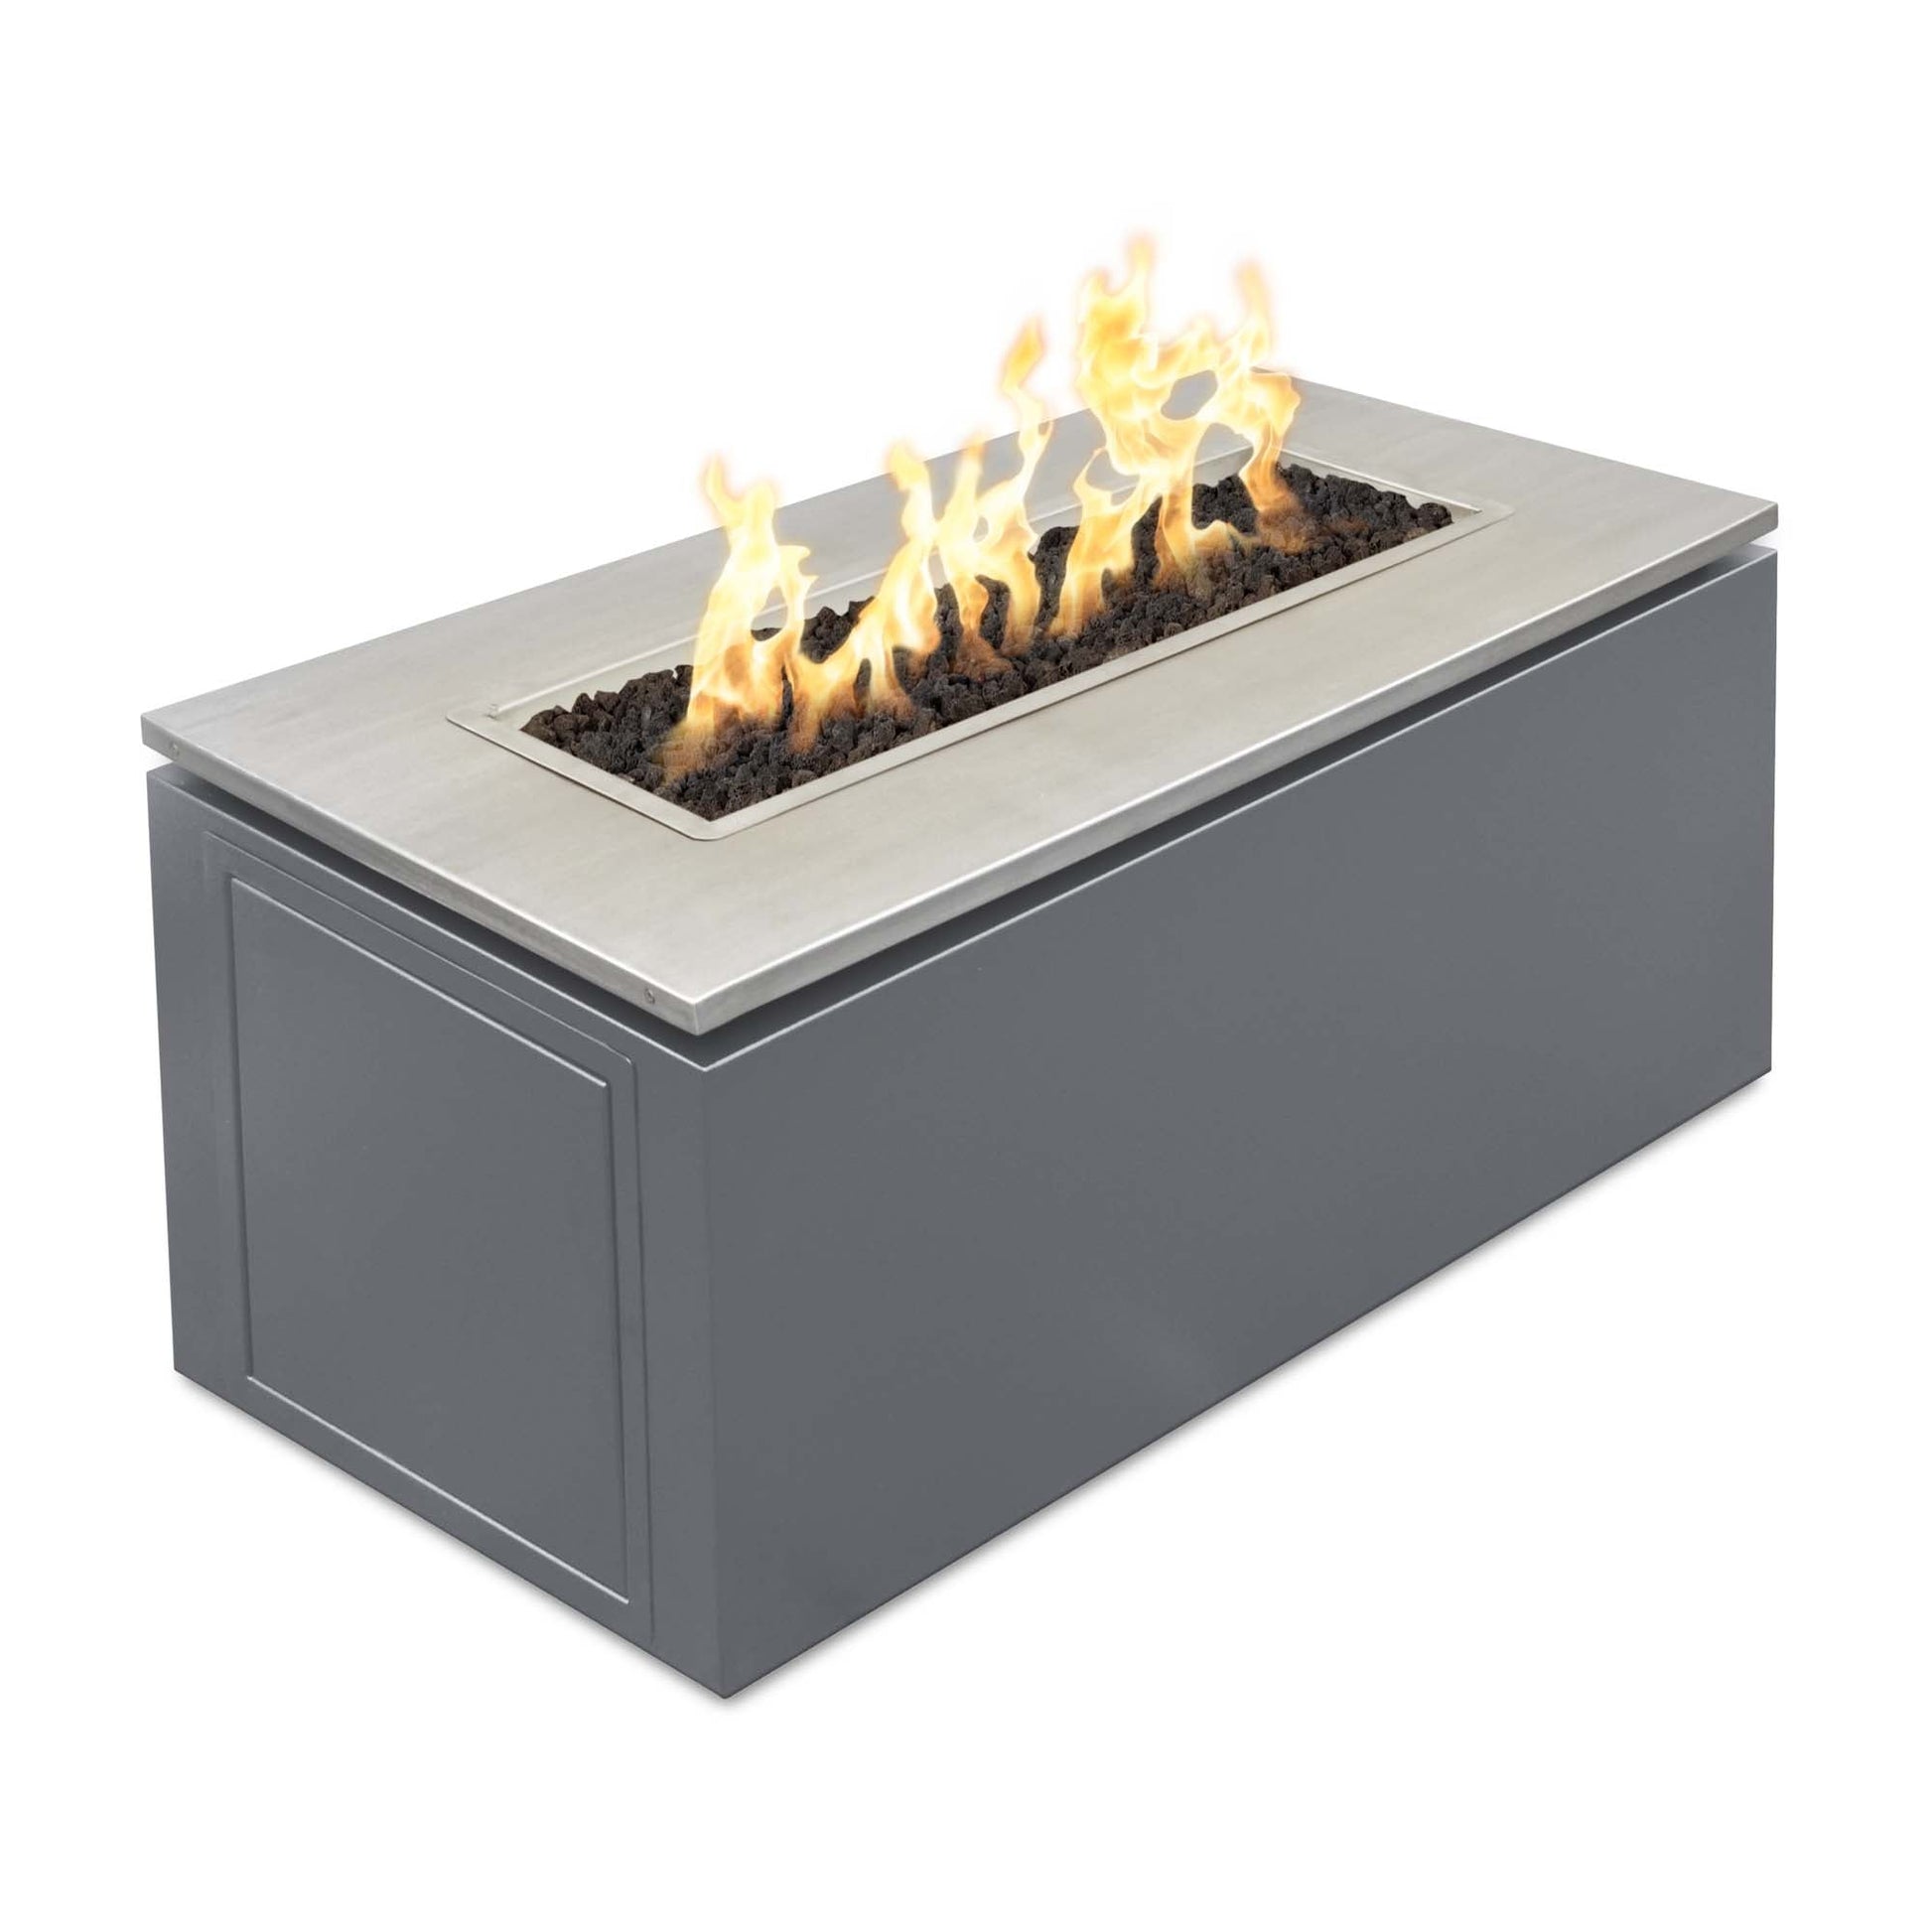 The Outdoor Plus Rectangular Merona 46" Stainless Steel Liquid Propane Fire Pit with 110V Electronic Ignition